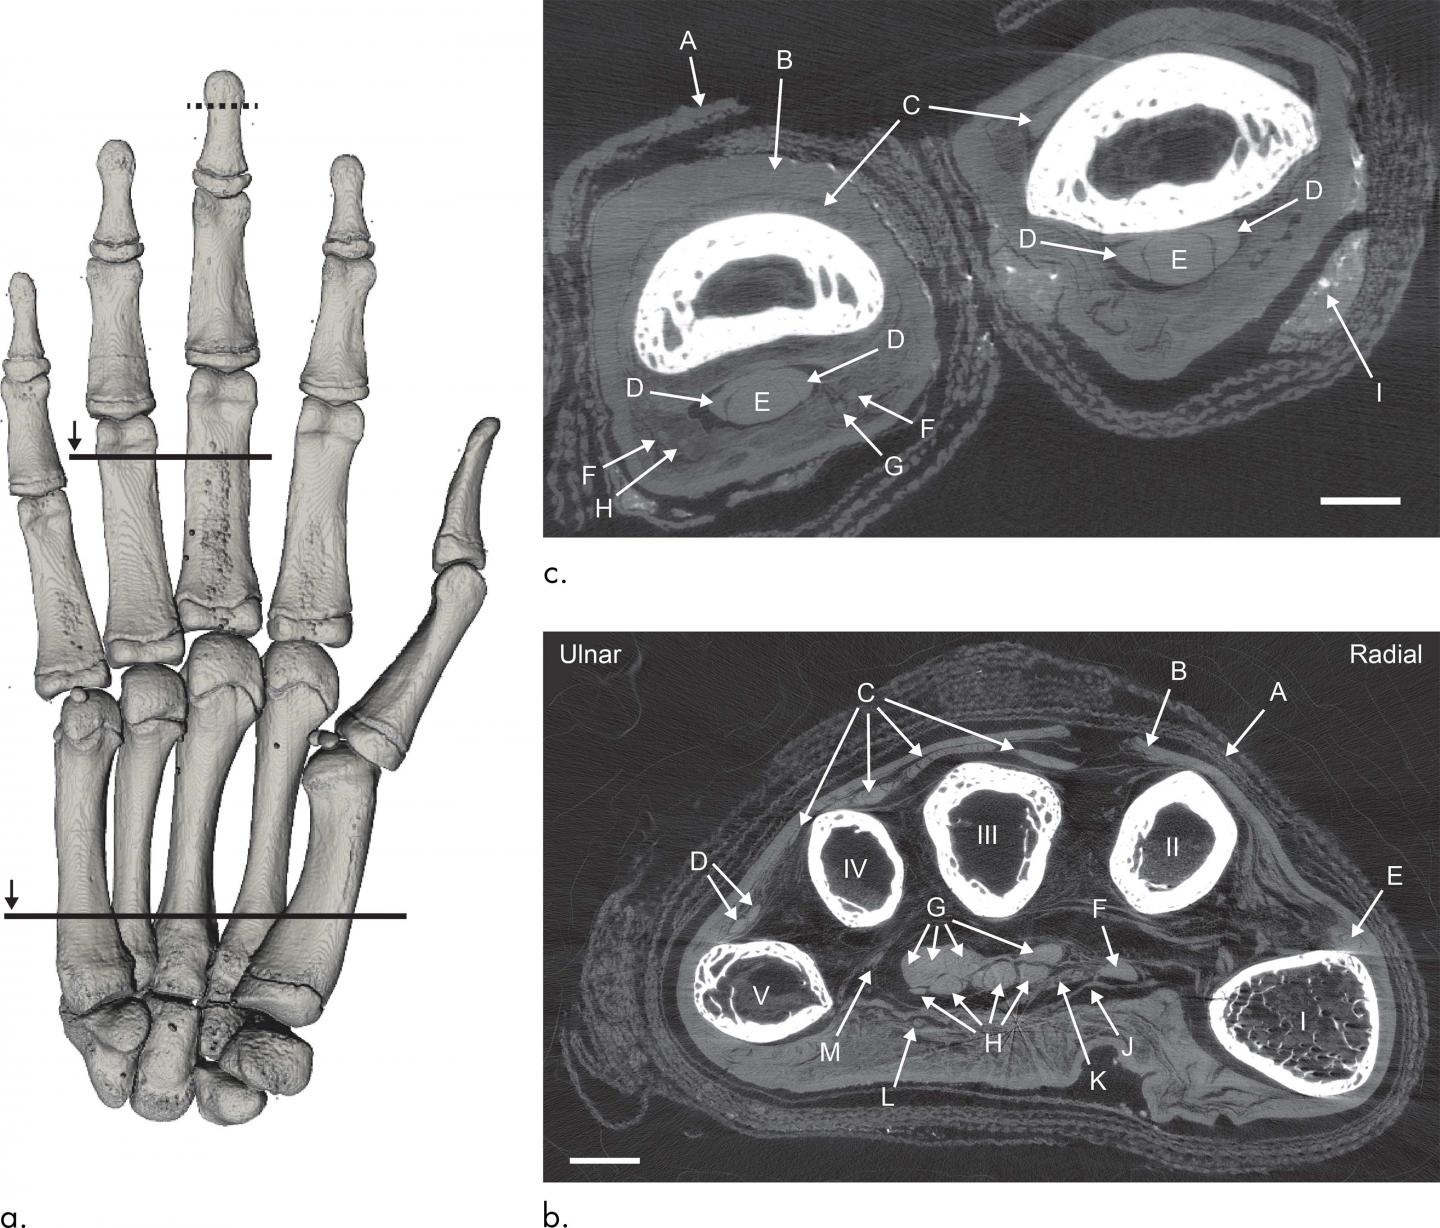 Images Show CT of Mummified Hand.